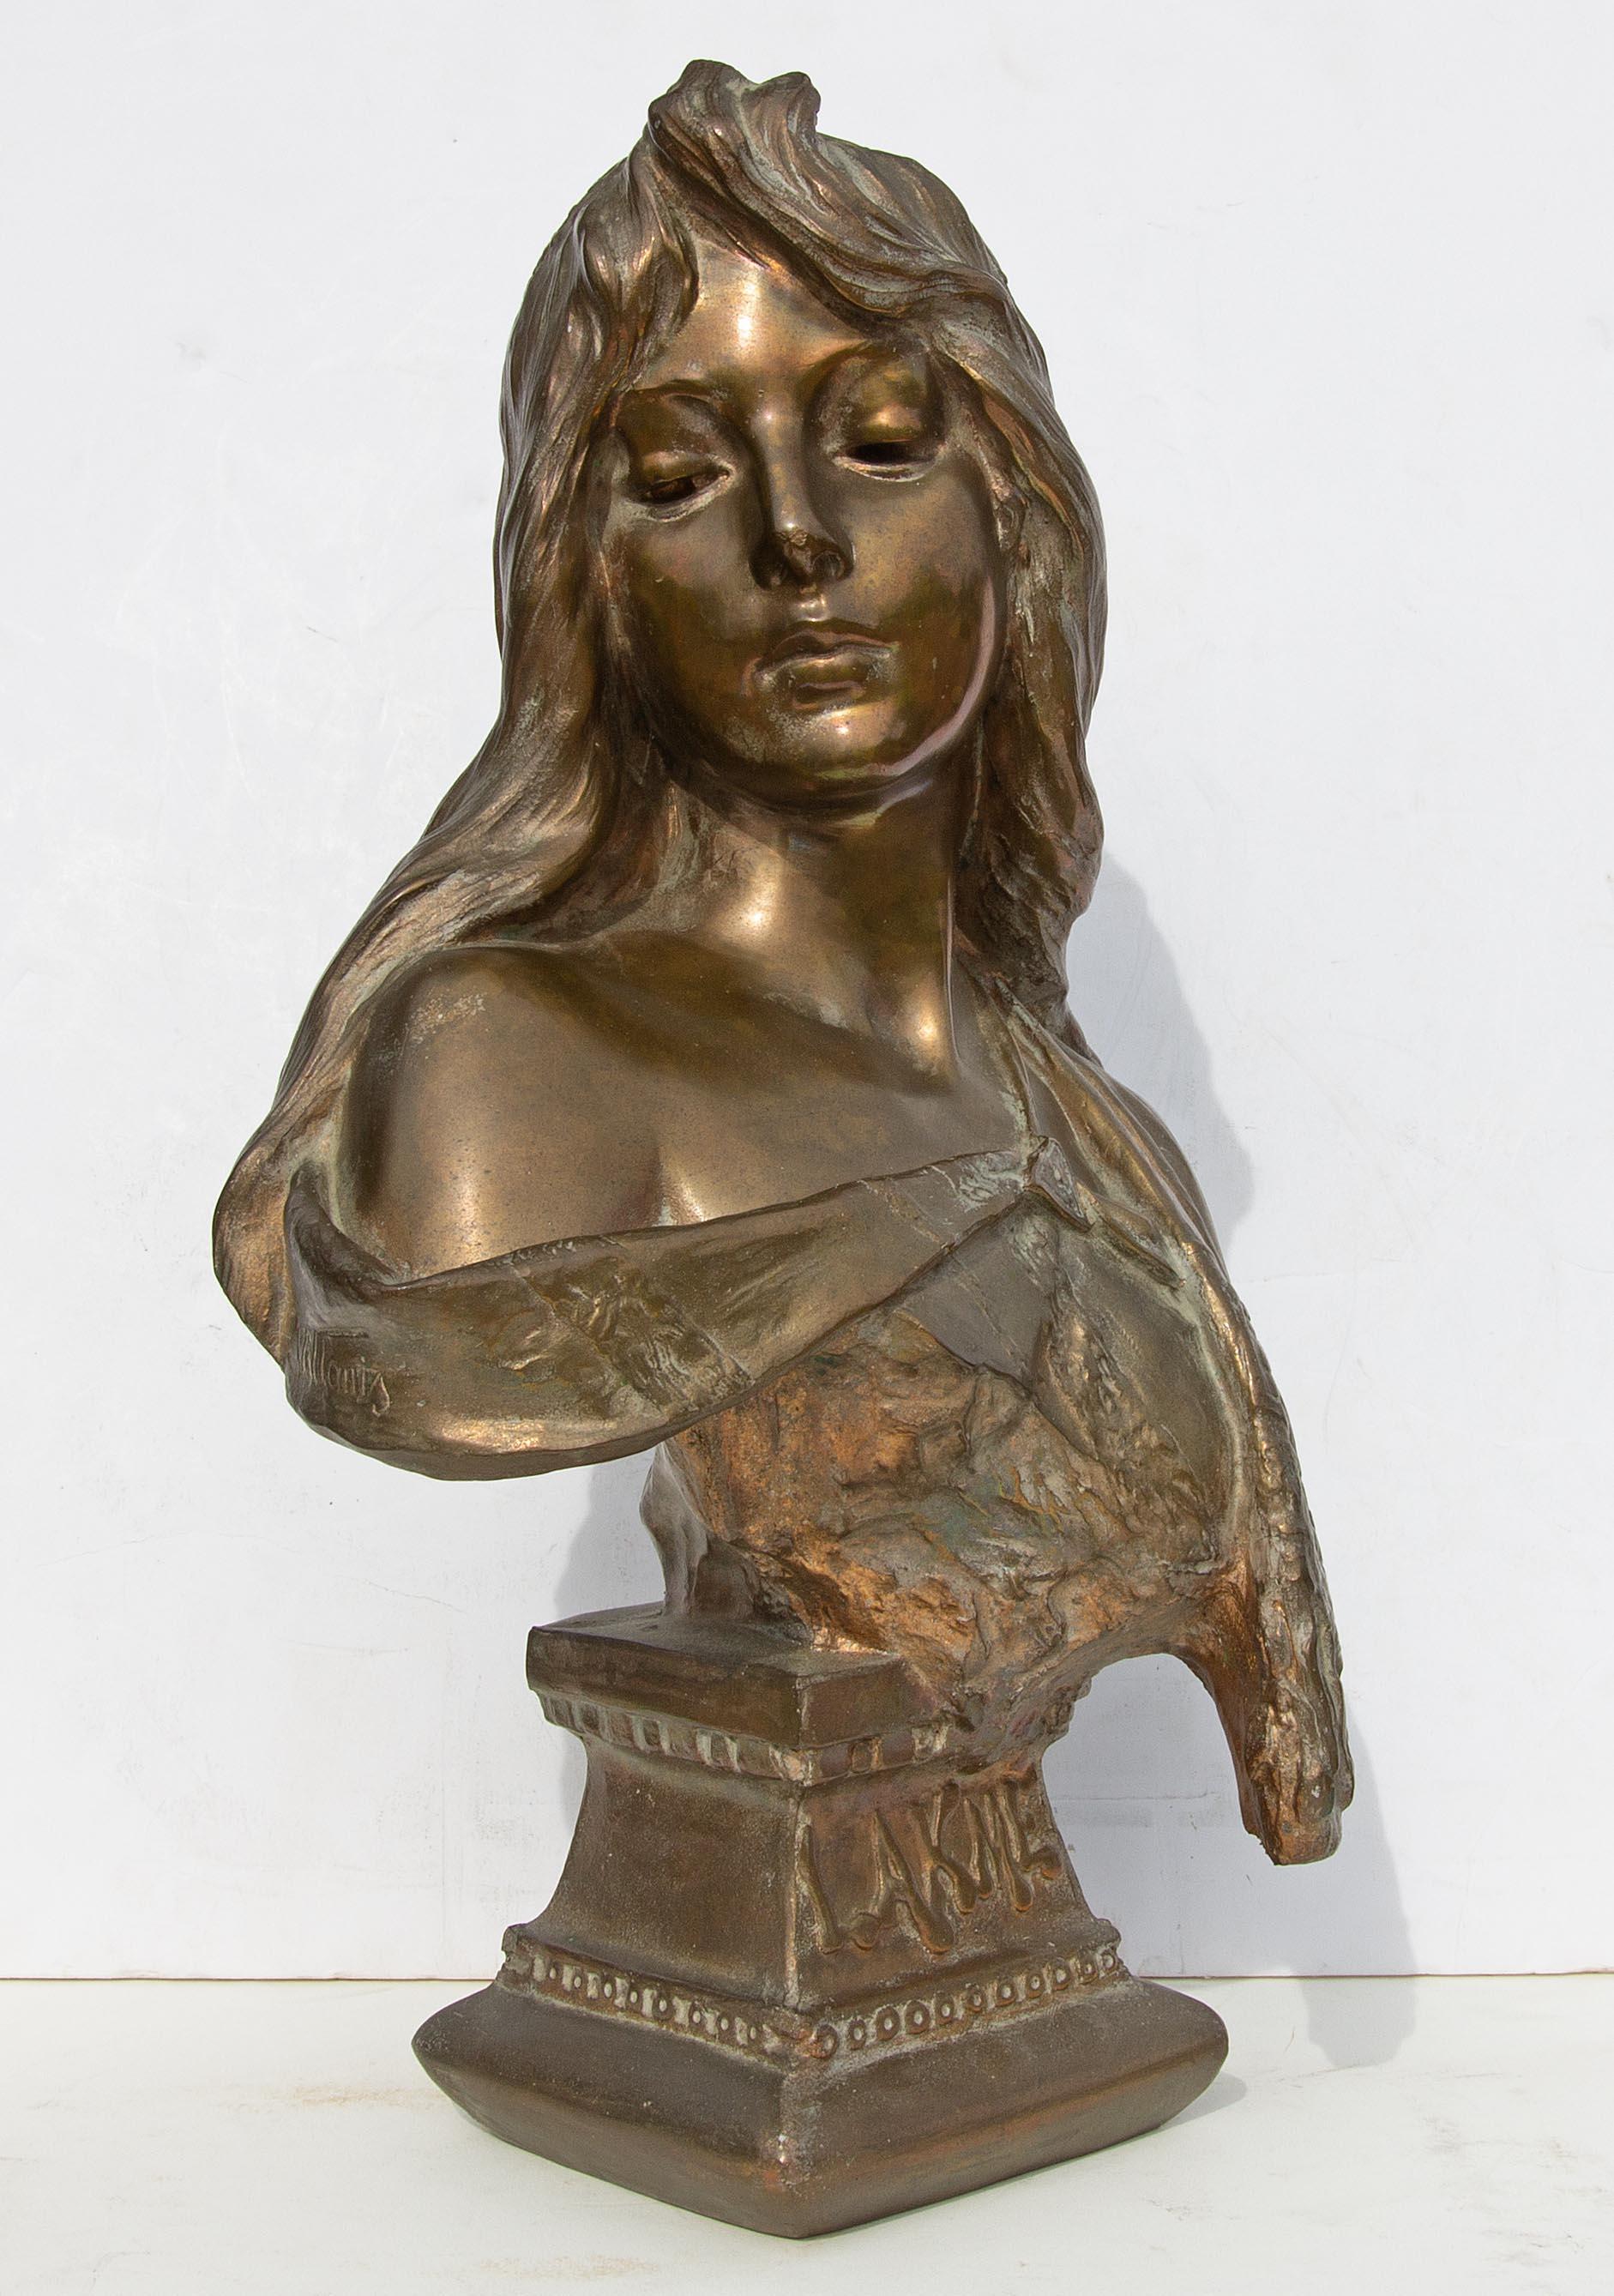 19th century bronze bust of a young woman by Emmanuel Villanis (French 1858-1914). Titled 